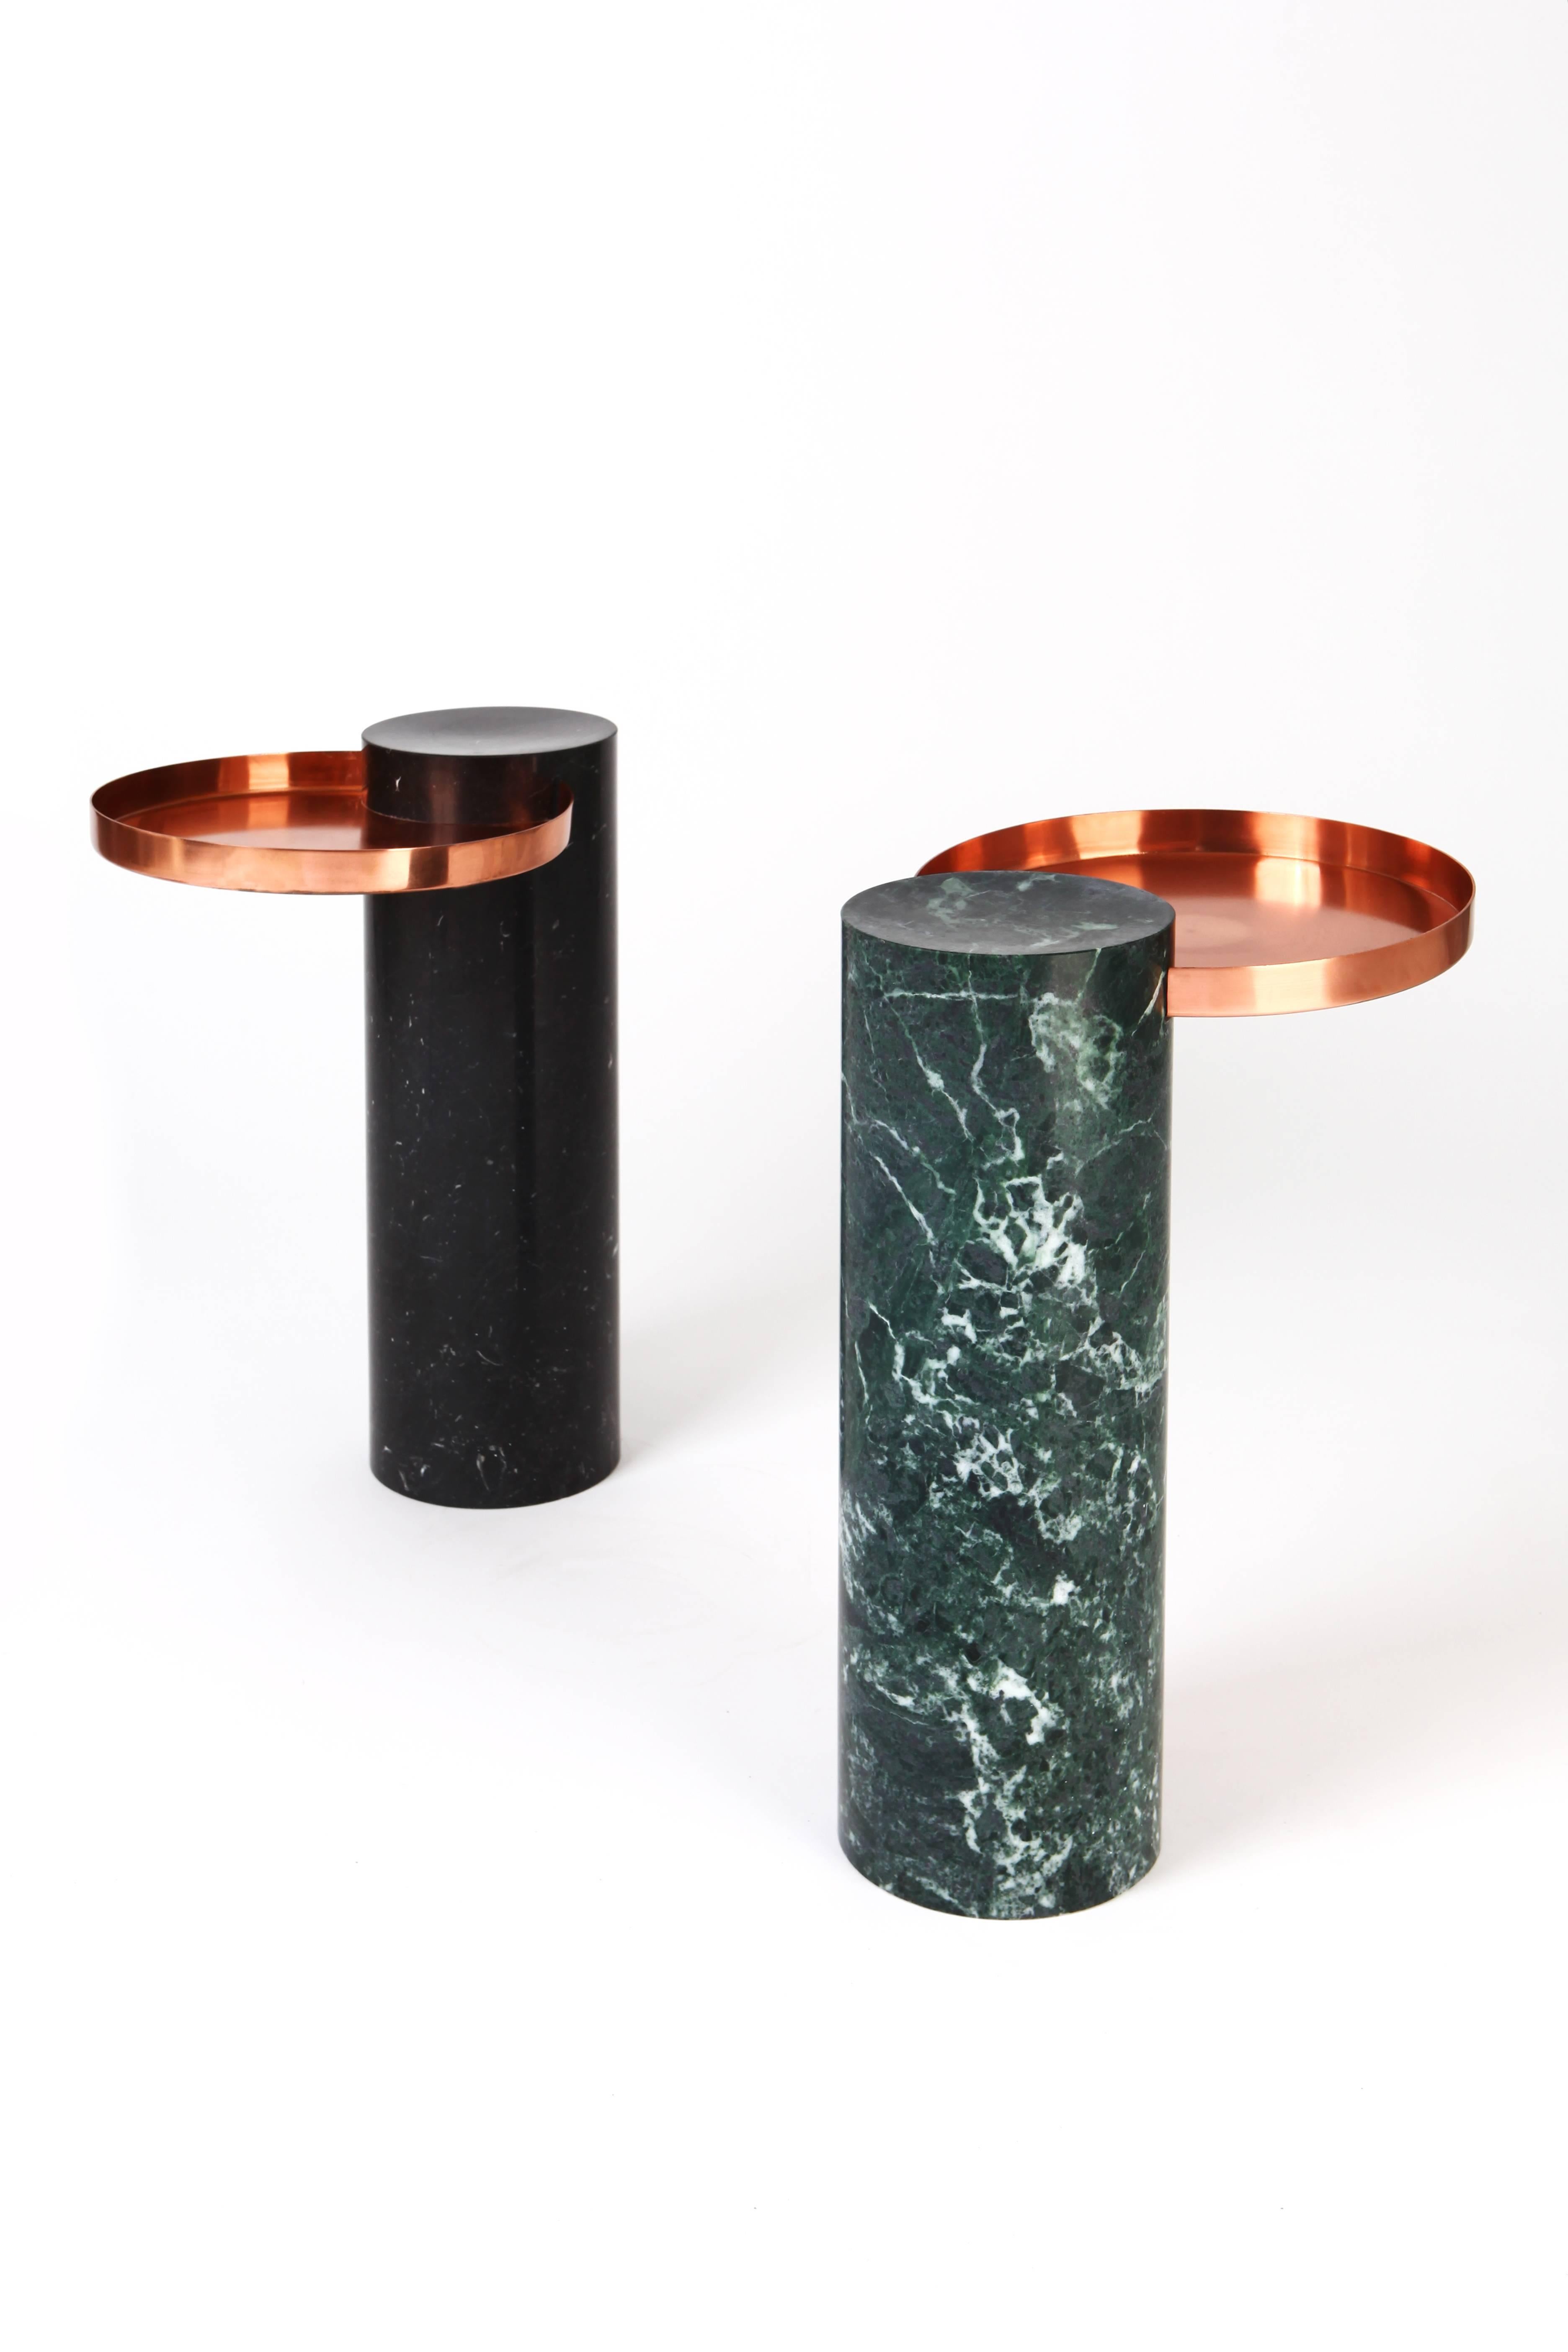 Contemporary Gueridon - Sebastian Herkner

The Salute table exists in 3 sizes, 3 different marbles for the column and 4 different finishes for the tray for a virtually endless number of configurations. In addition, Salute can be made bespoke with